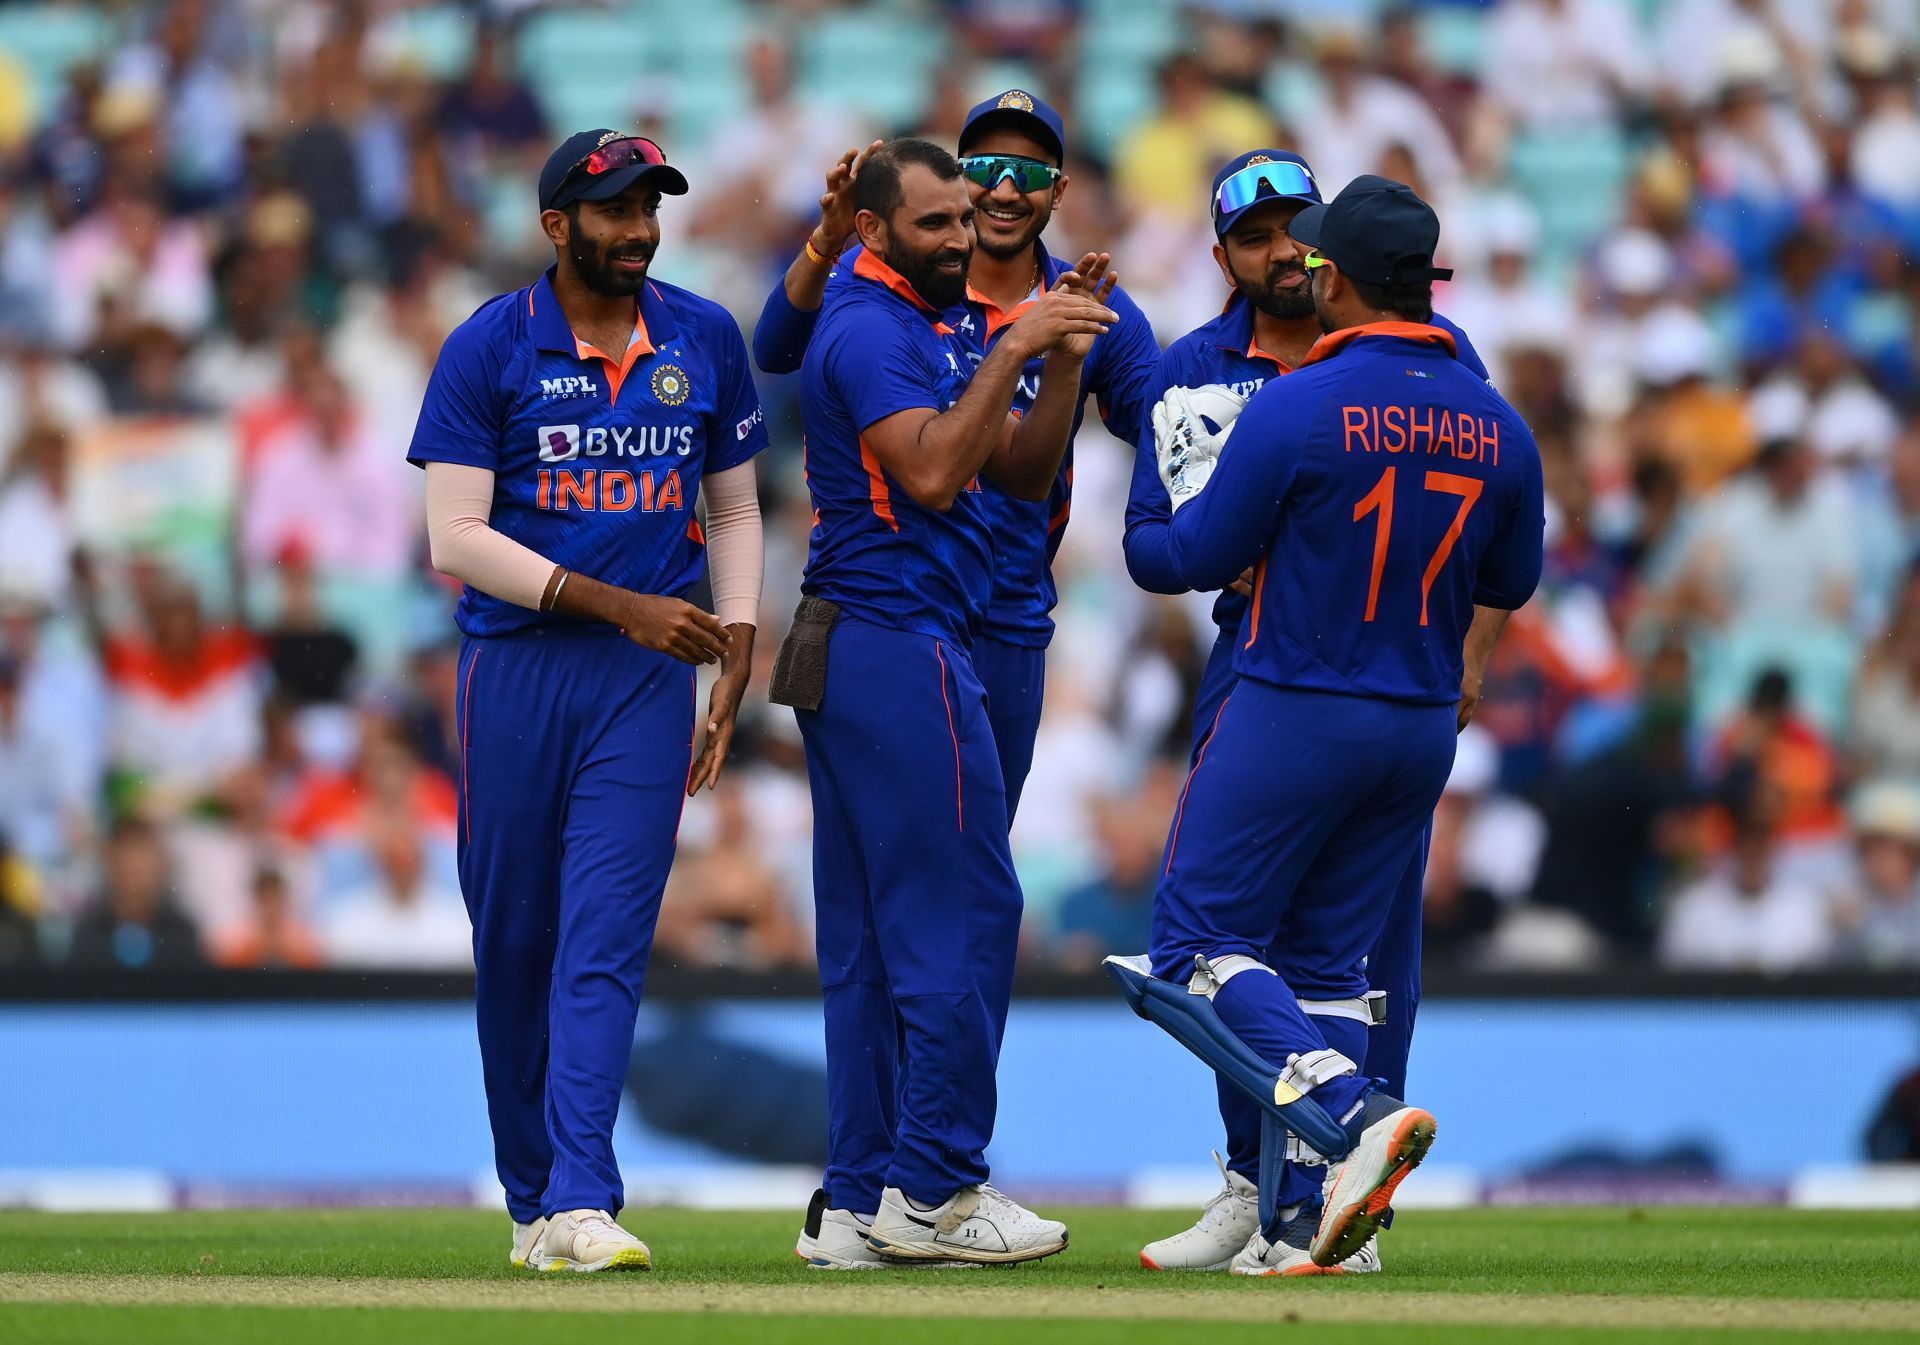 Mohammed Shami scalped three wickets for Team India against England at Kennington Oval (Image: Getty)